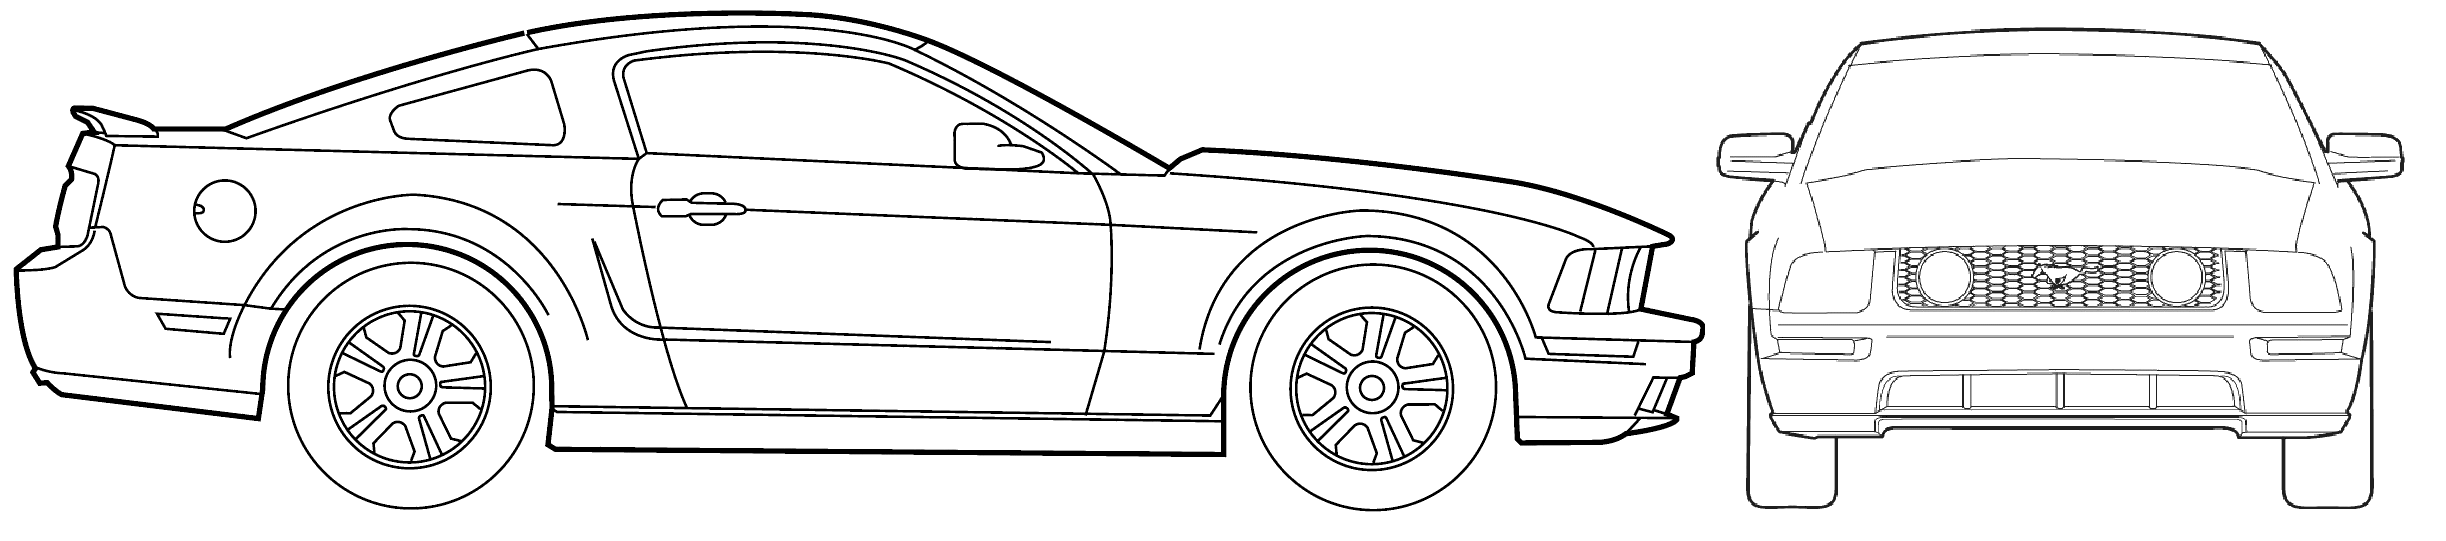 2006 Ford mustang blueprints